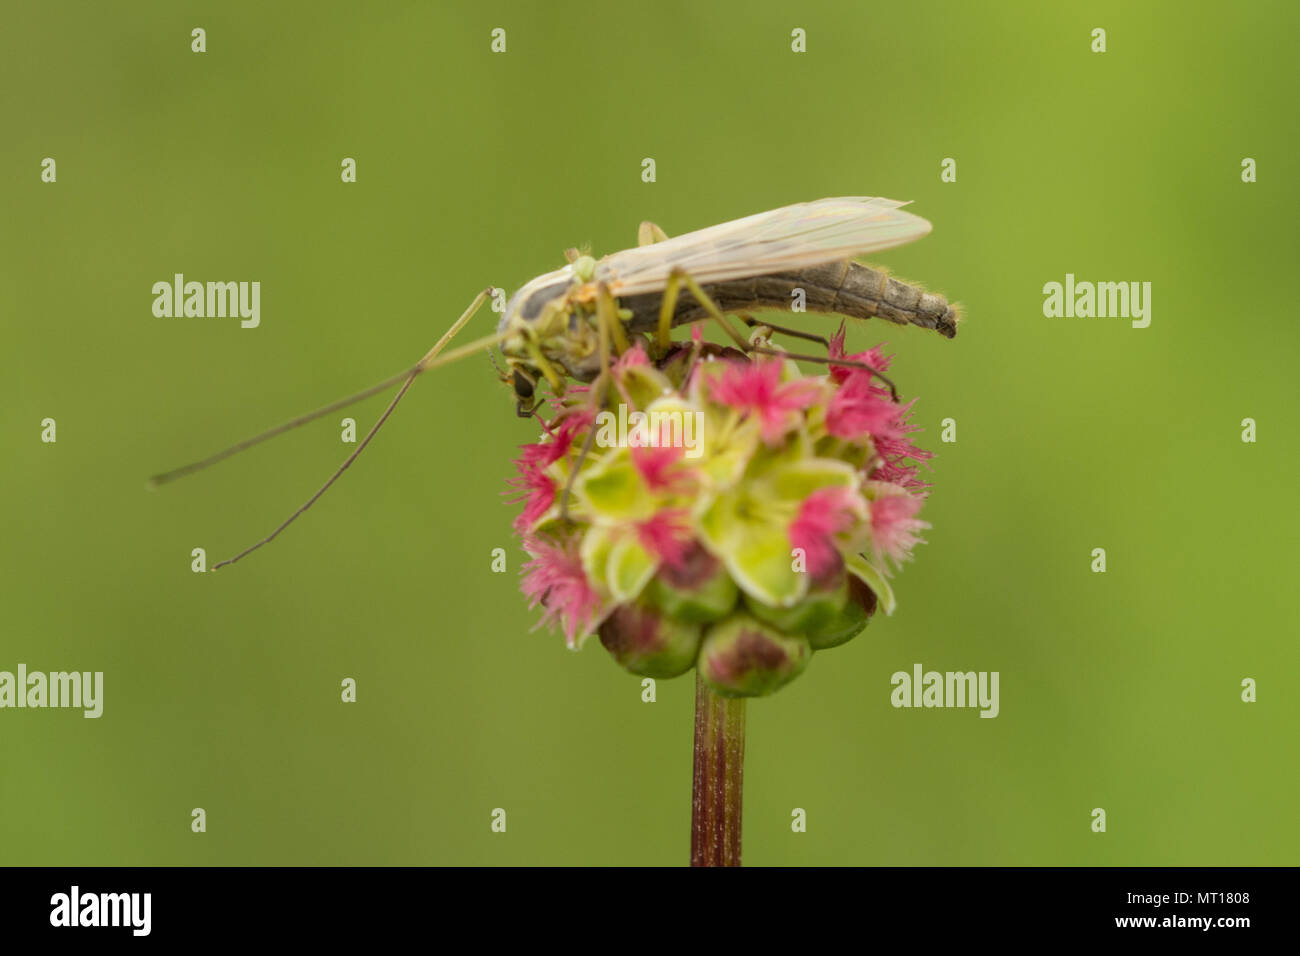 Close-up of a non-biting midge (Chironomidae family) on a salad burnet wildflower in Surrey, UK Stock Photo